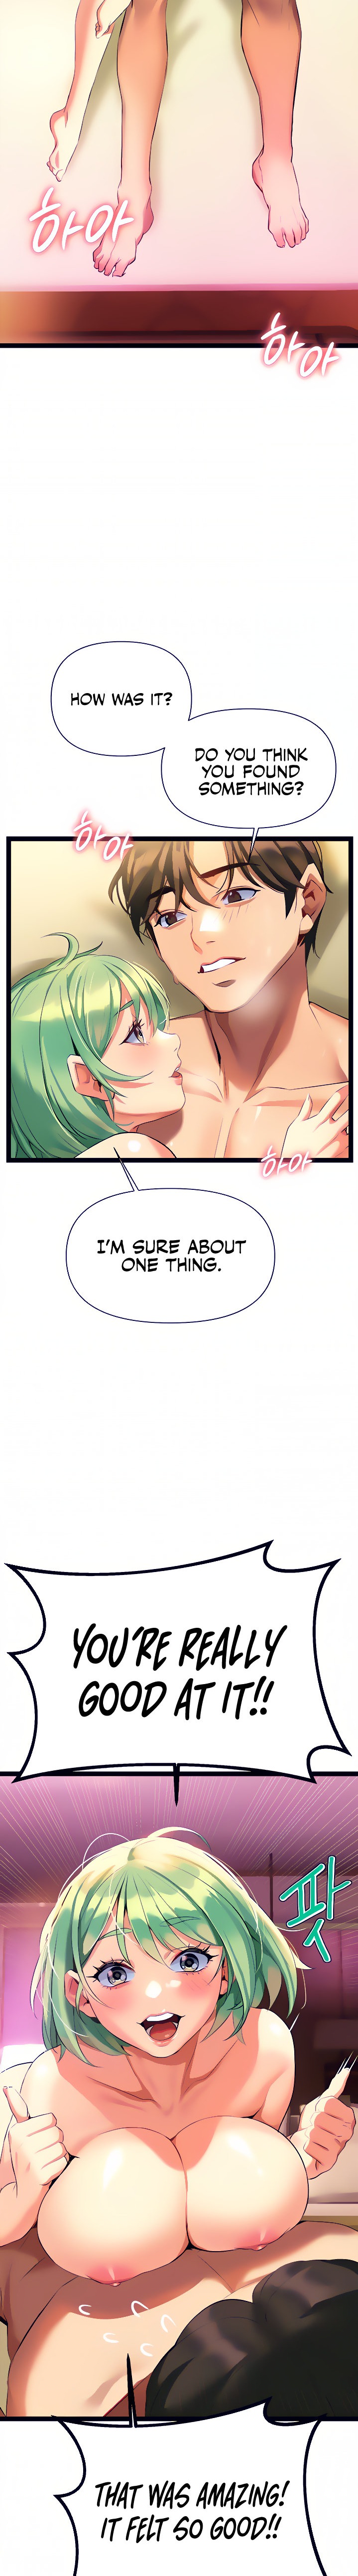 I Need You, Noona - Chapter 6 Page 4